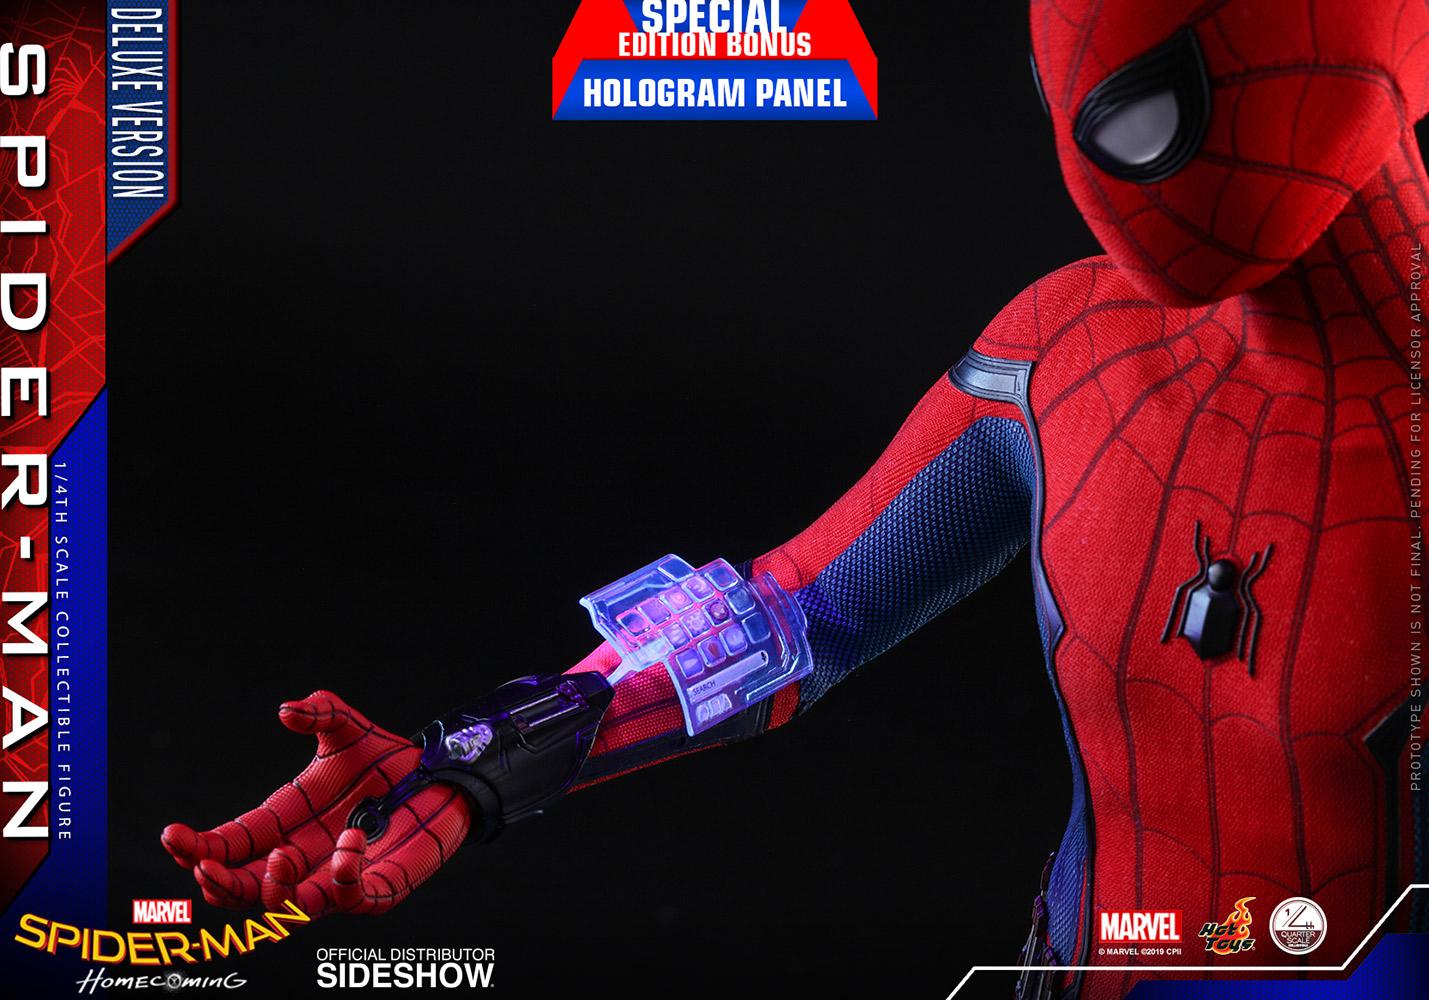 Spider-Man (Deluxe Version) Special Edition Quarter Scale Exclusive Figure